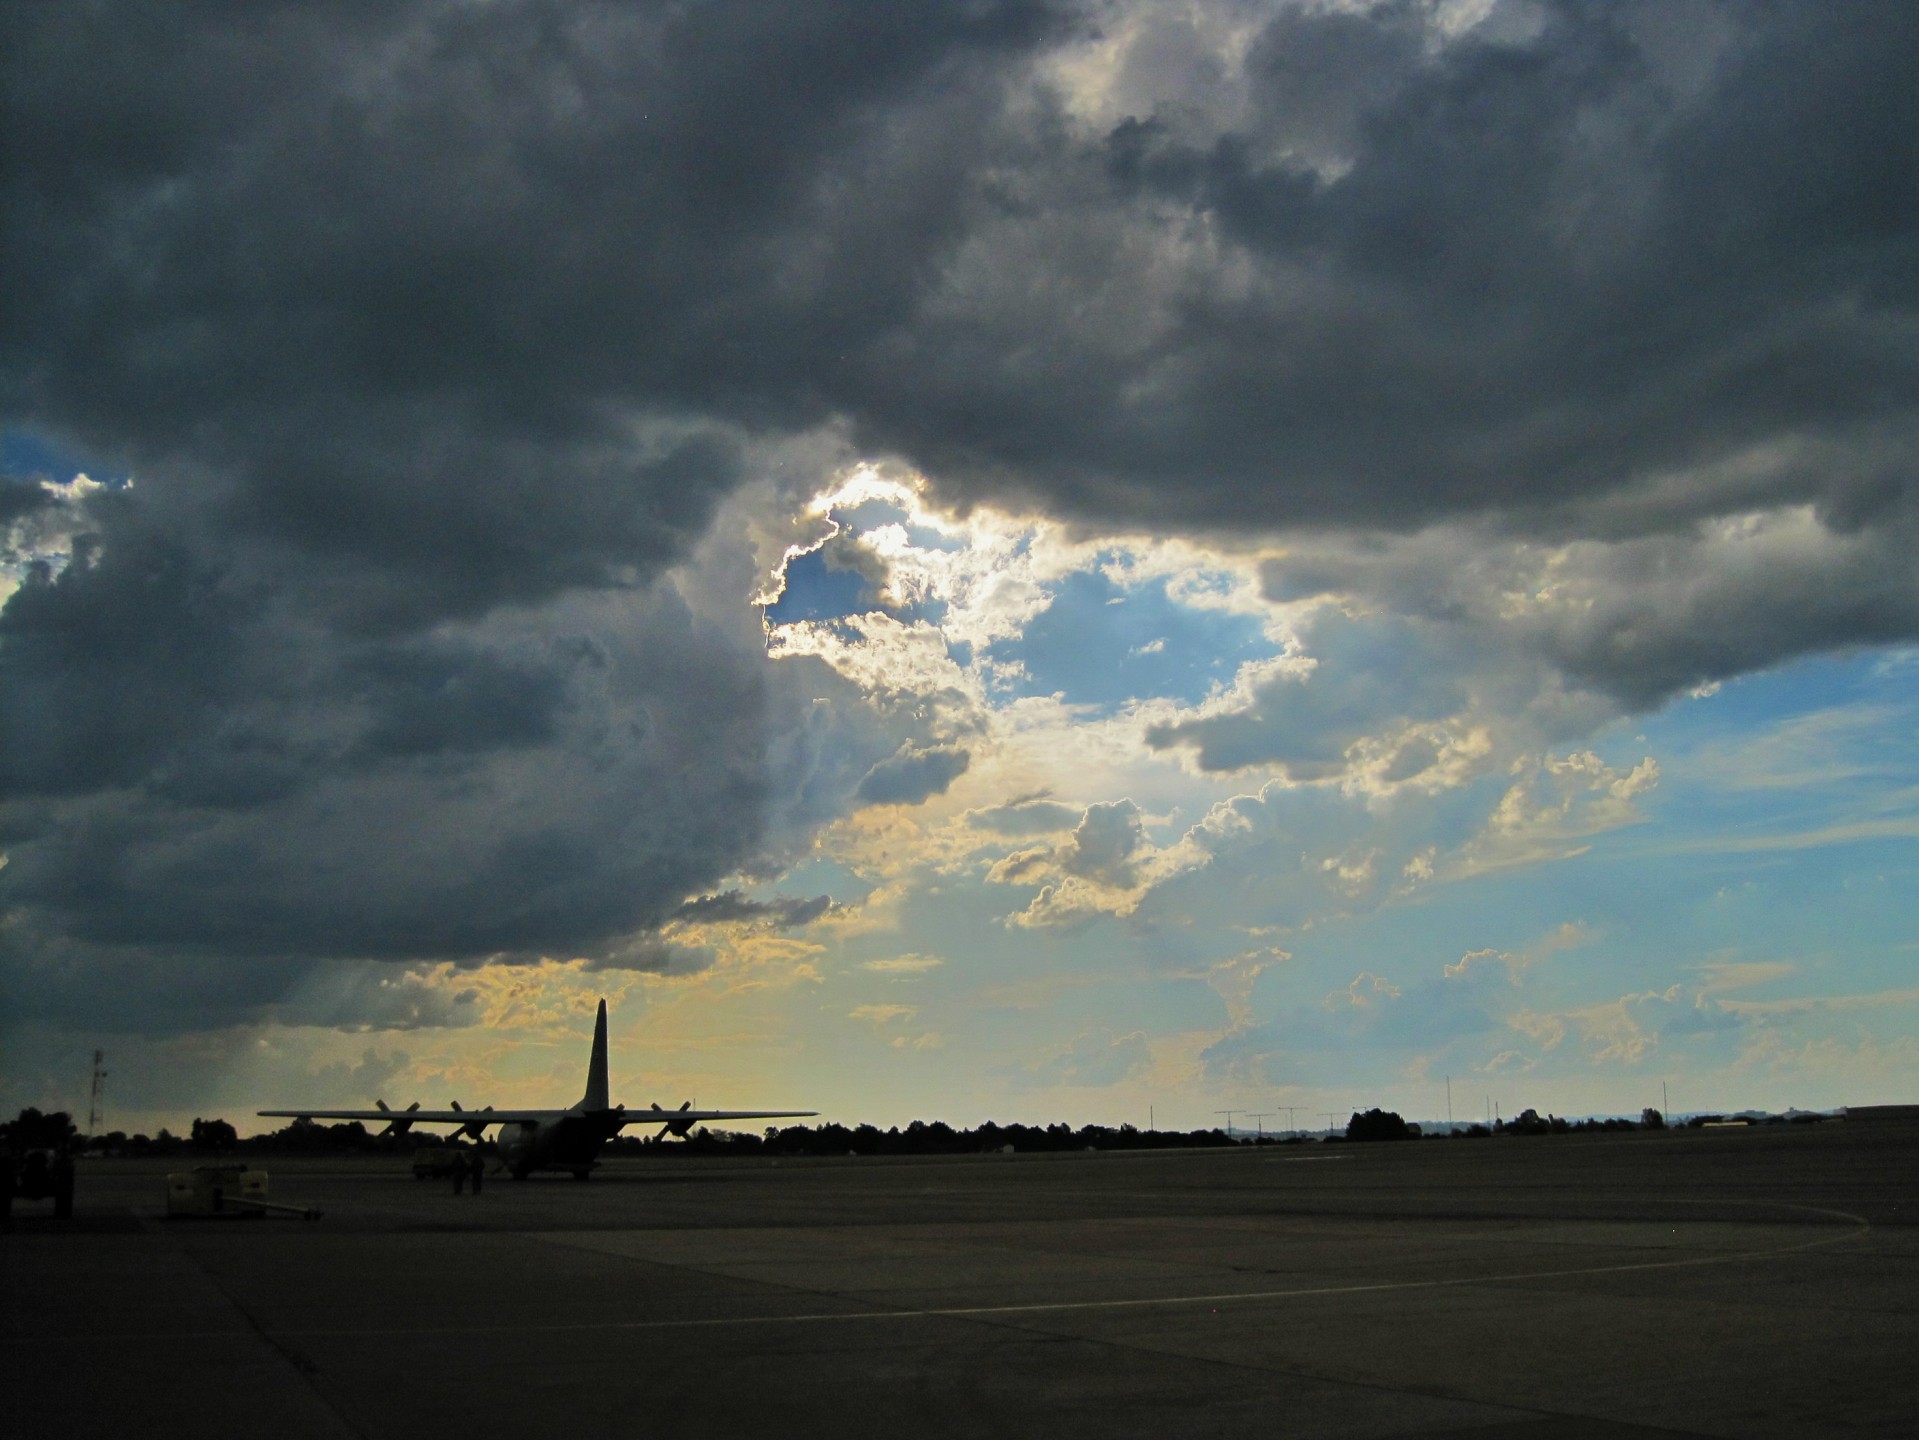 Clouds Massing Over Airfield